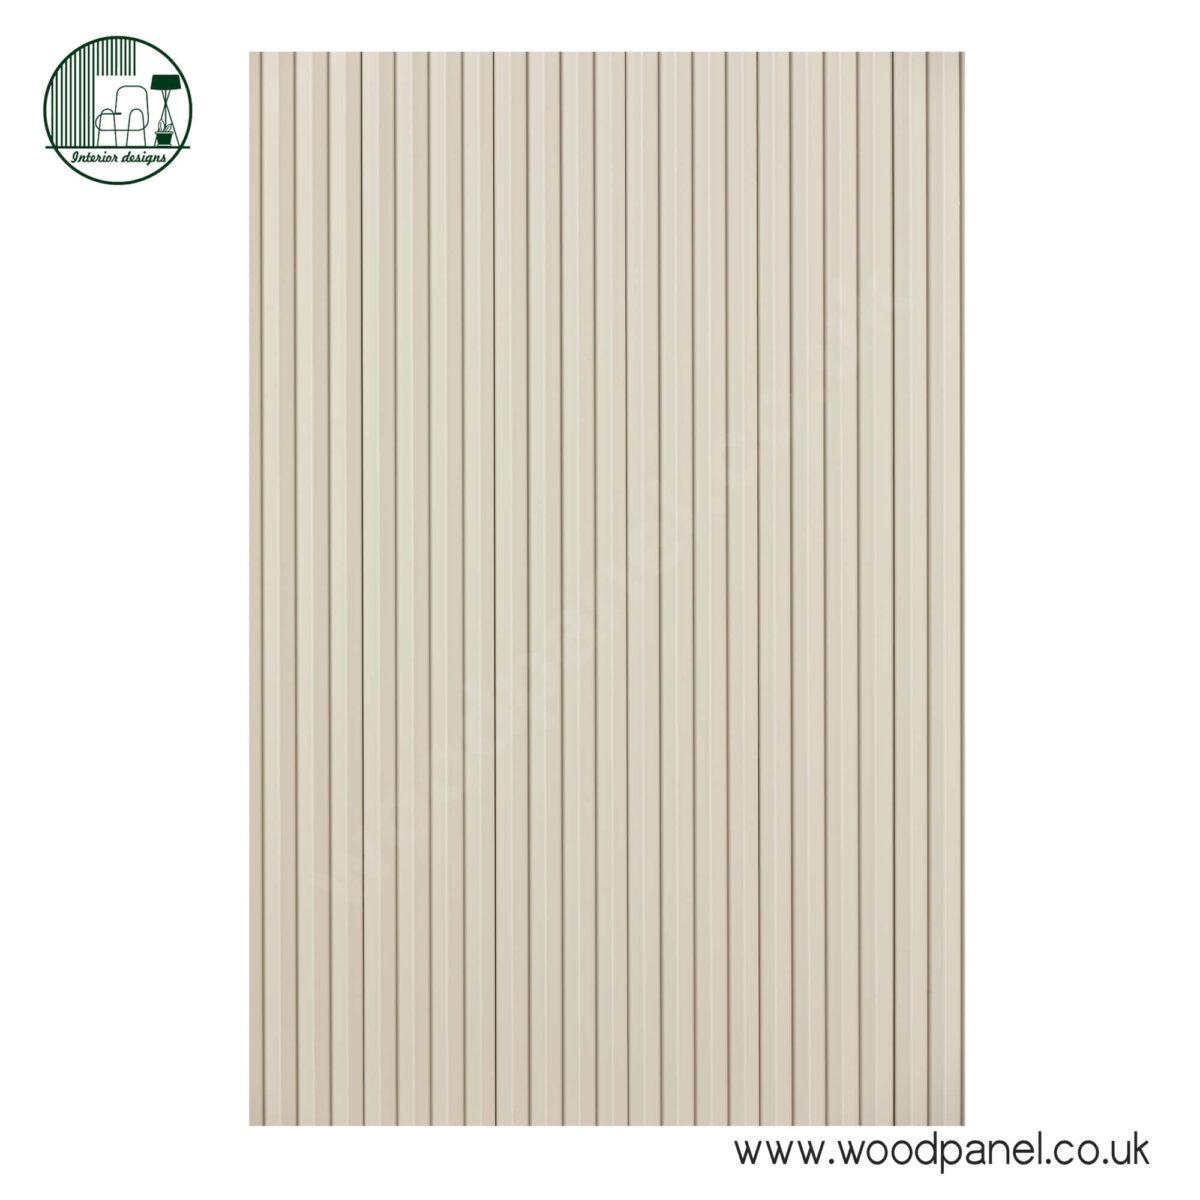 Synergy Wood Panel U222 Crema Beige SOFT TOUCH ST122 6PCS in a pack